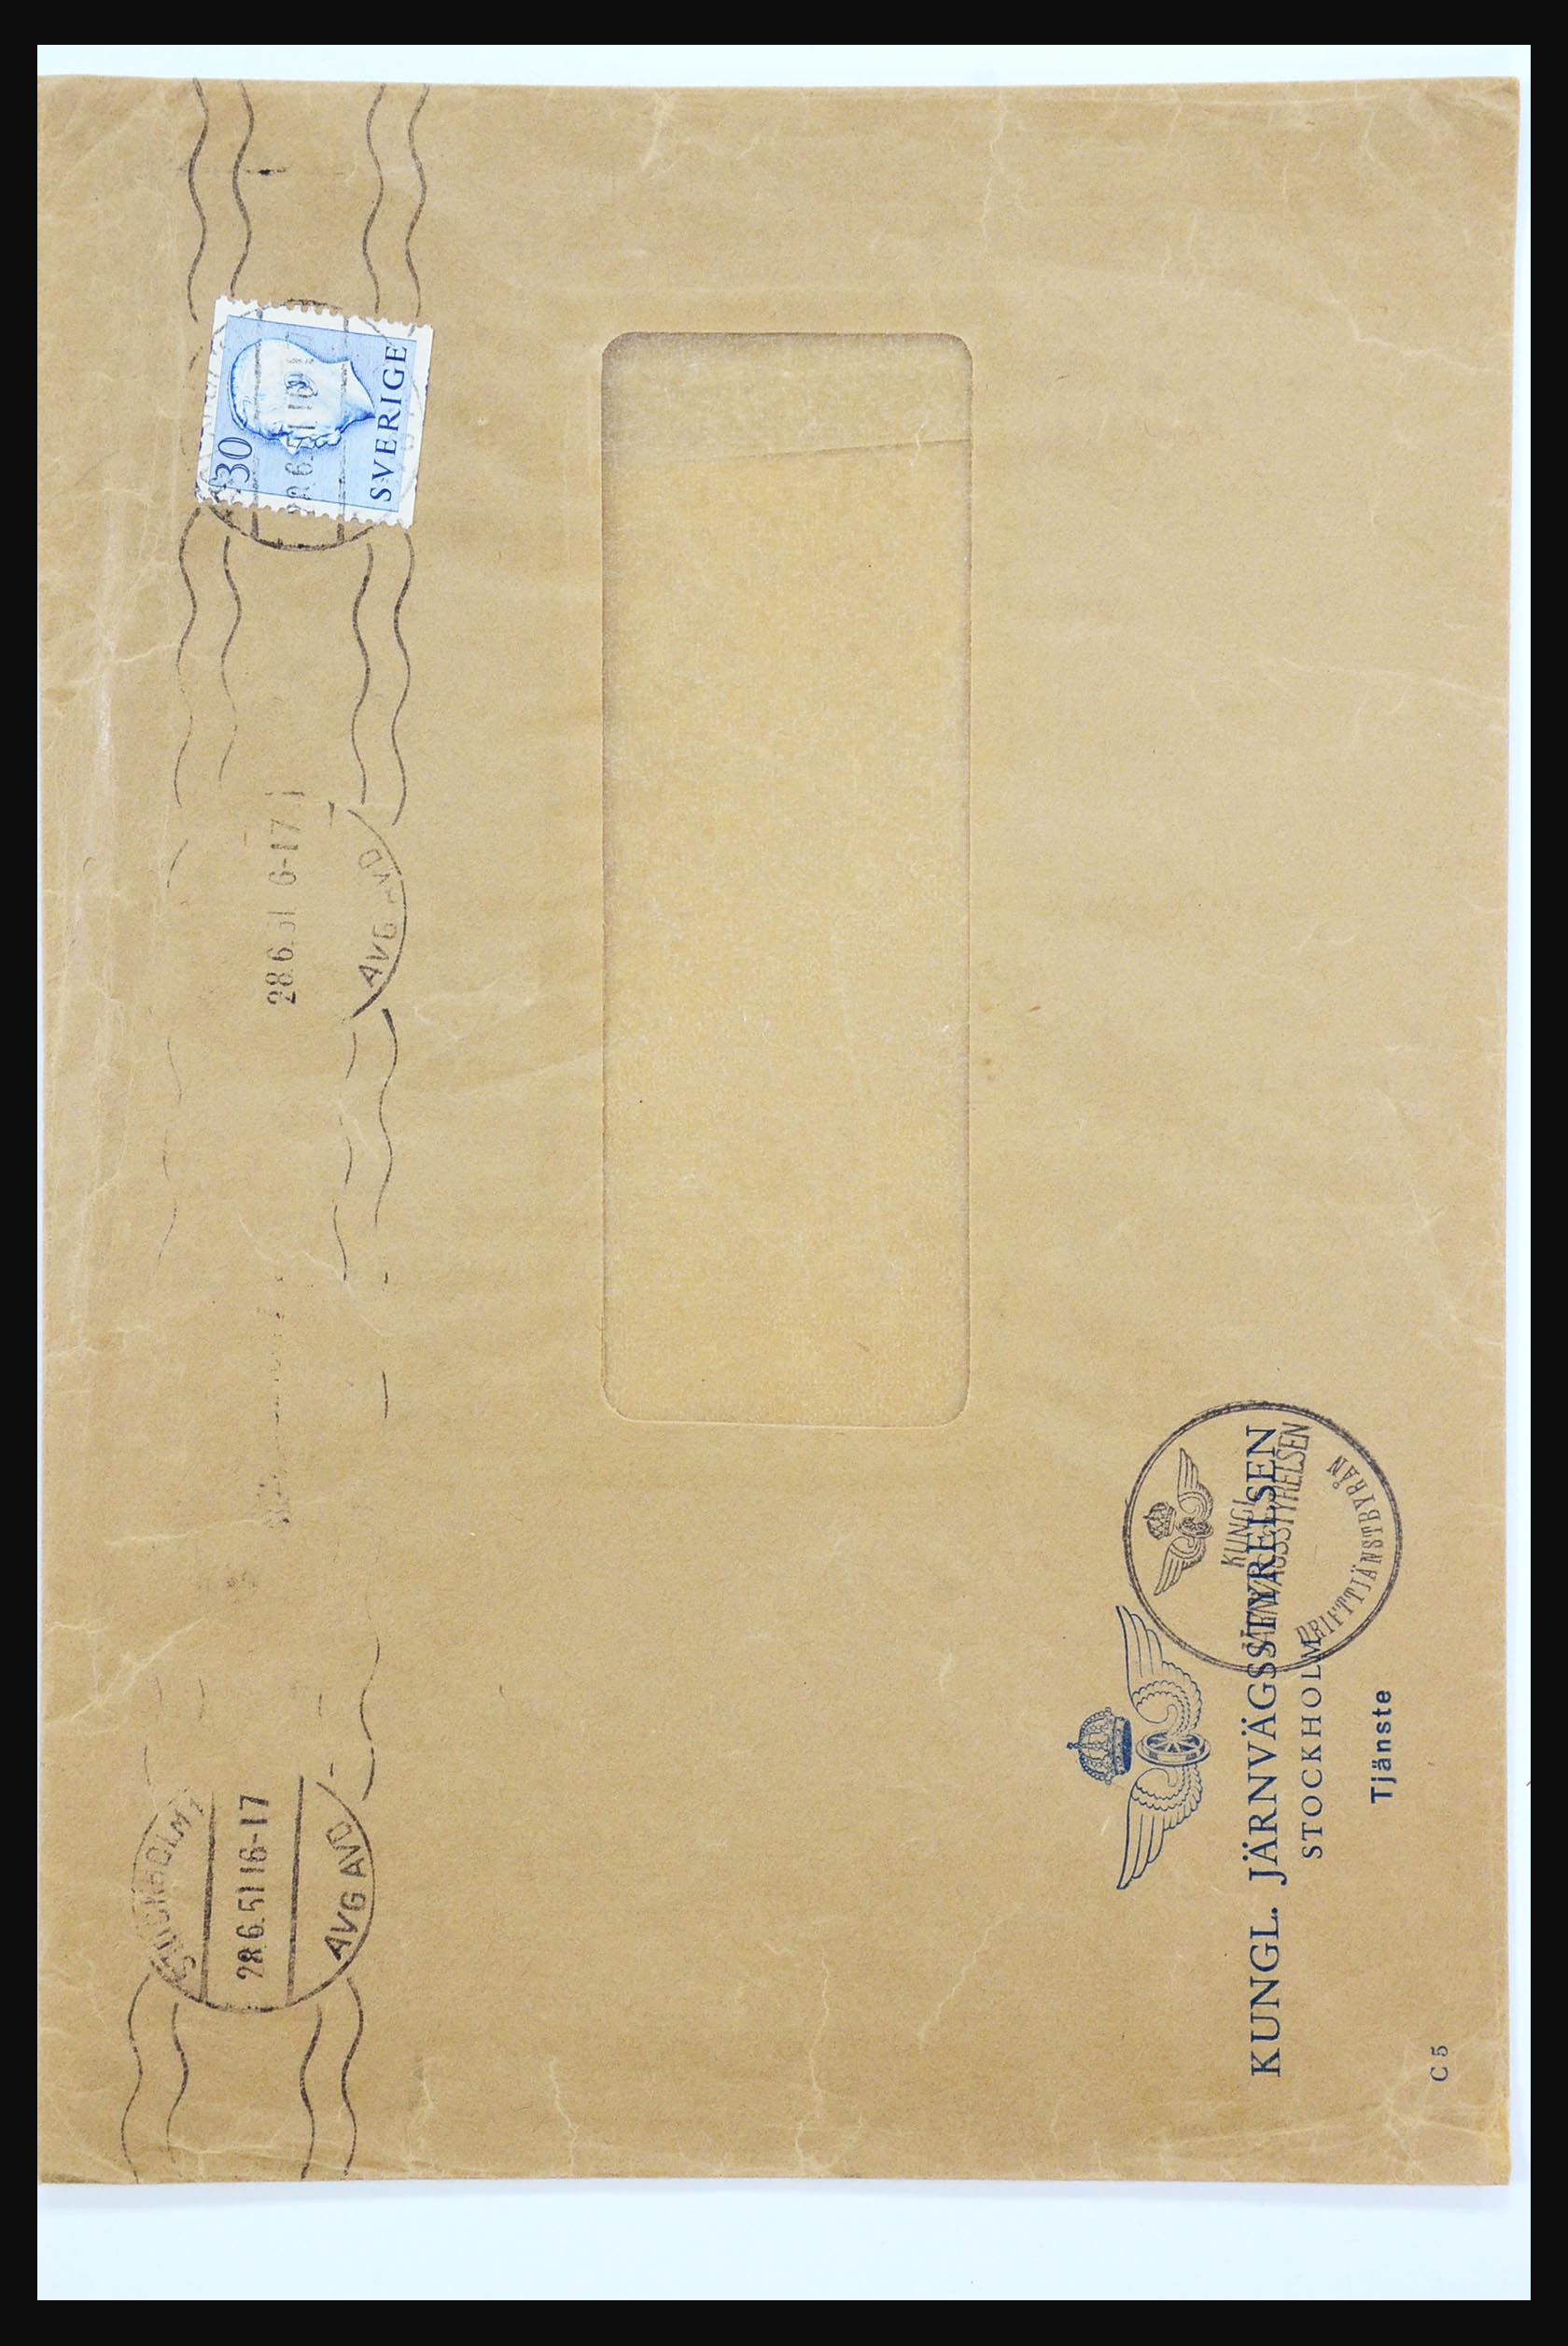 31364 078 - 31364 Sweden covers 1864-1960.